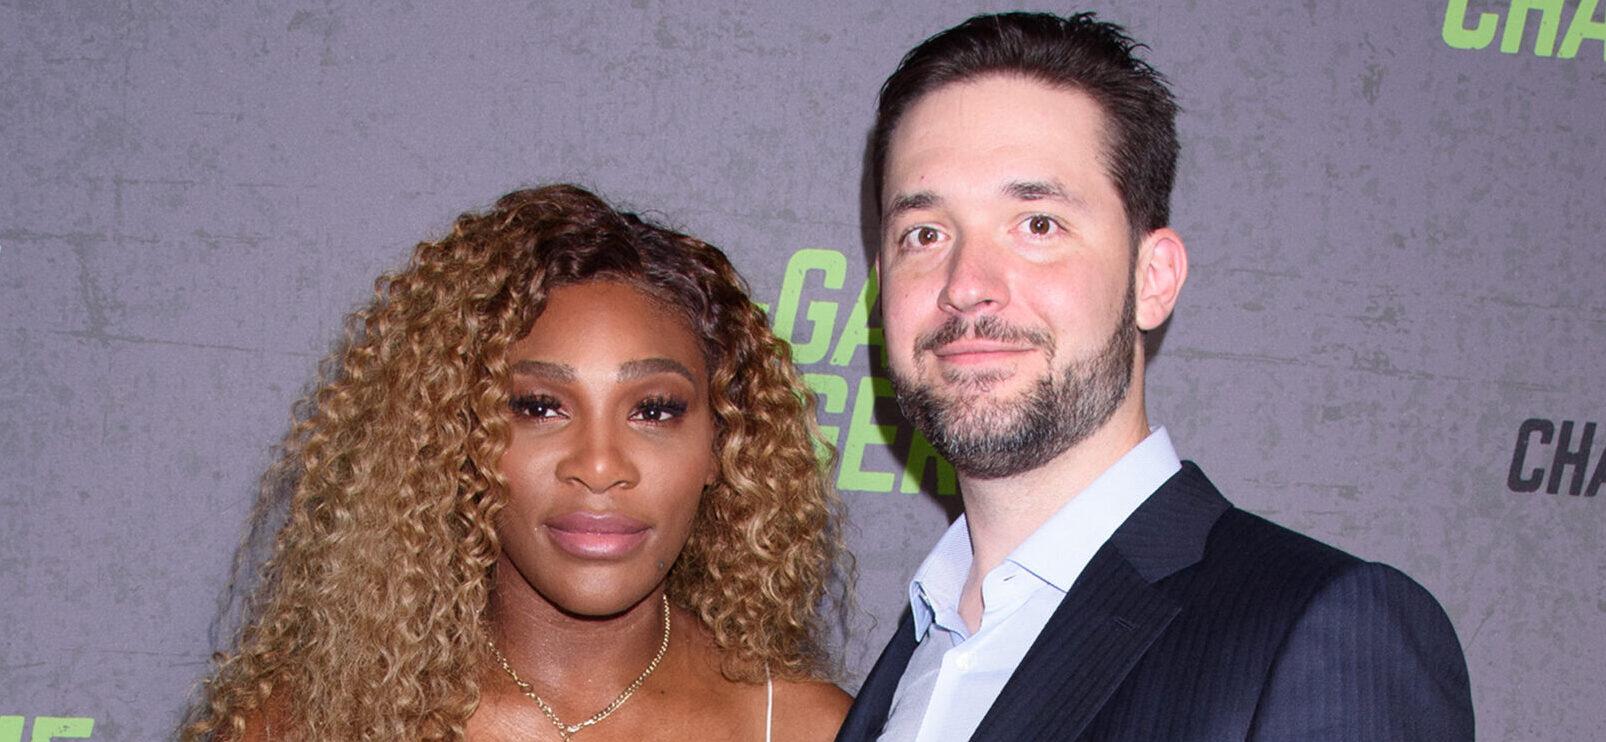 Fans Praise Serena Williams’ Husband Alexis Ohanian For ‘Normalizing Paternity Leave’